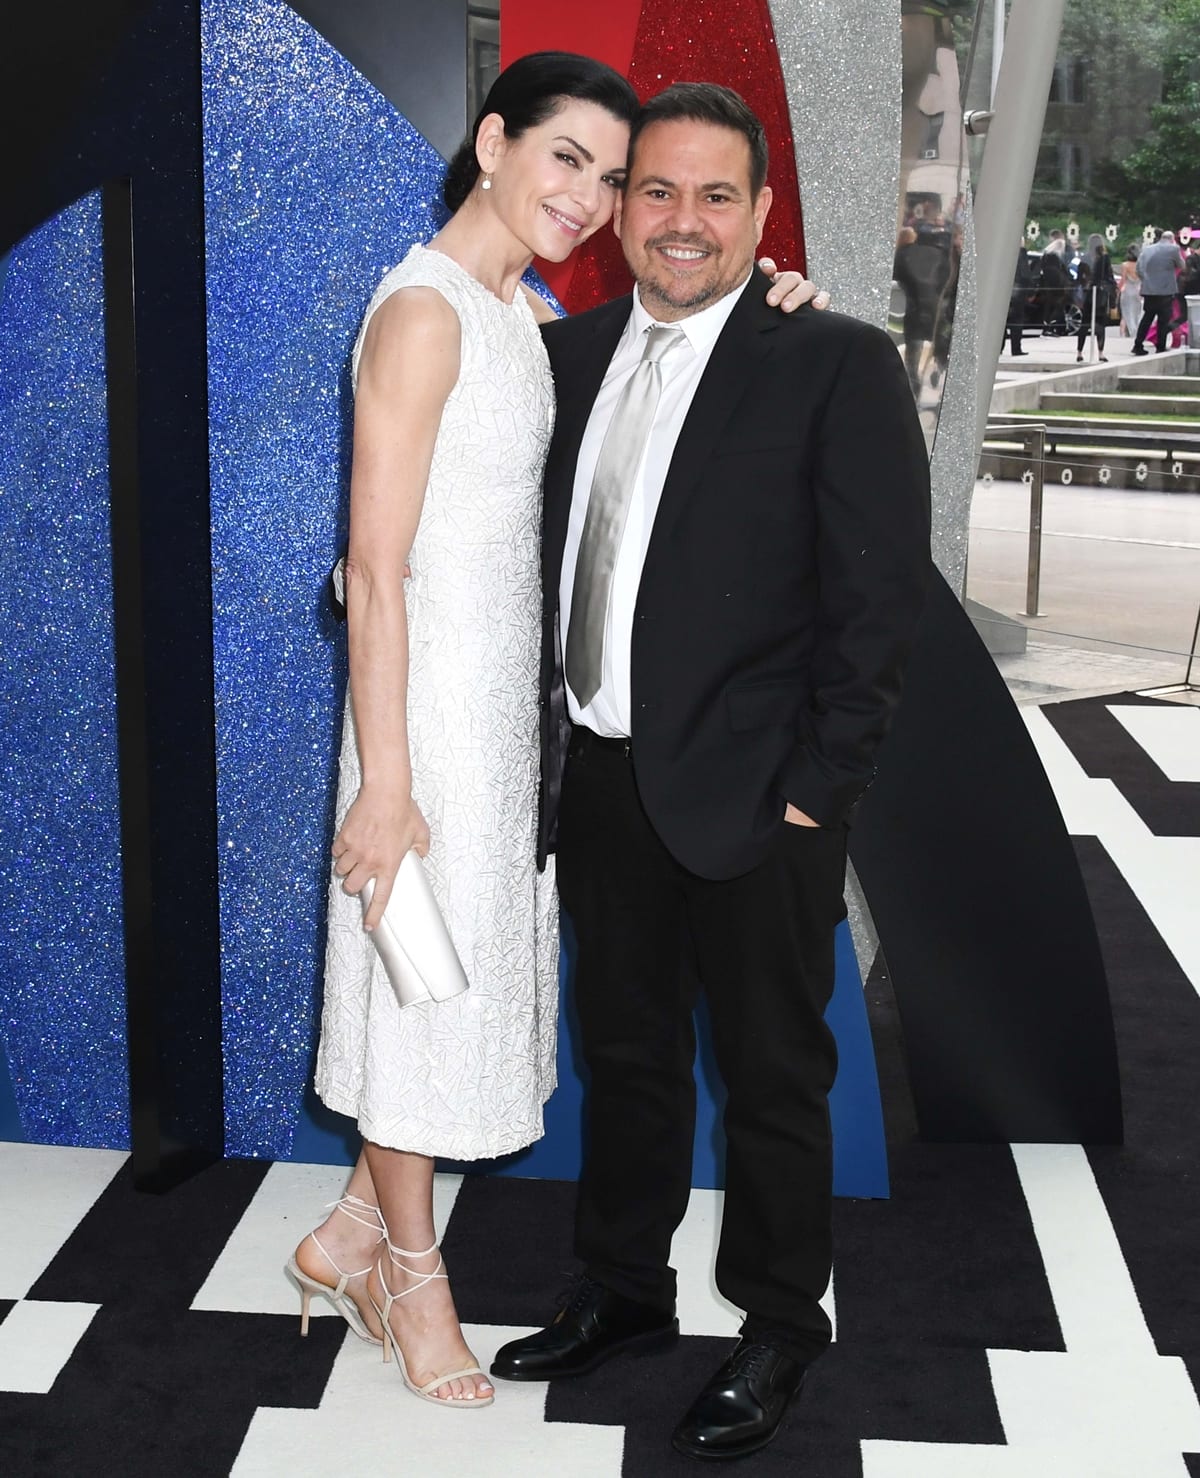 Actress Julianna Margulies and designer Narciso Rodriguez attend the 2018 CFDA Fashion Awards